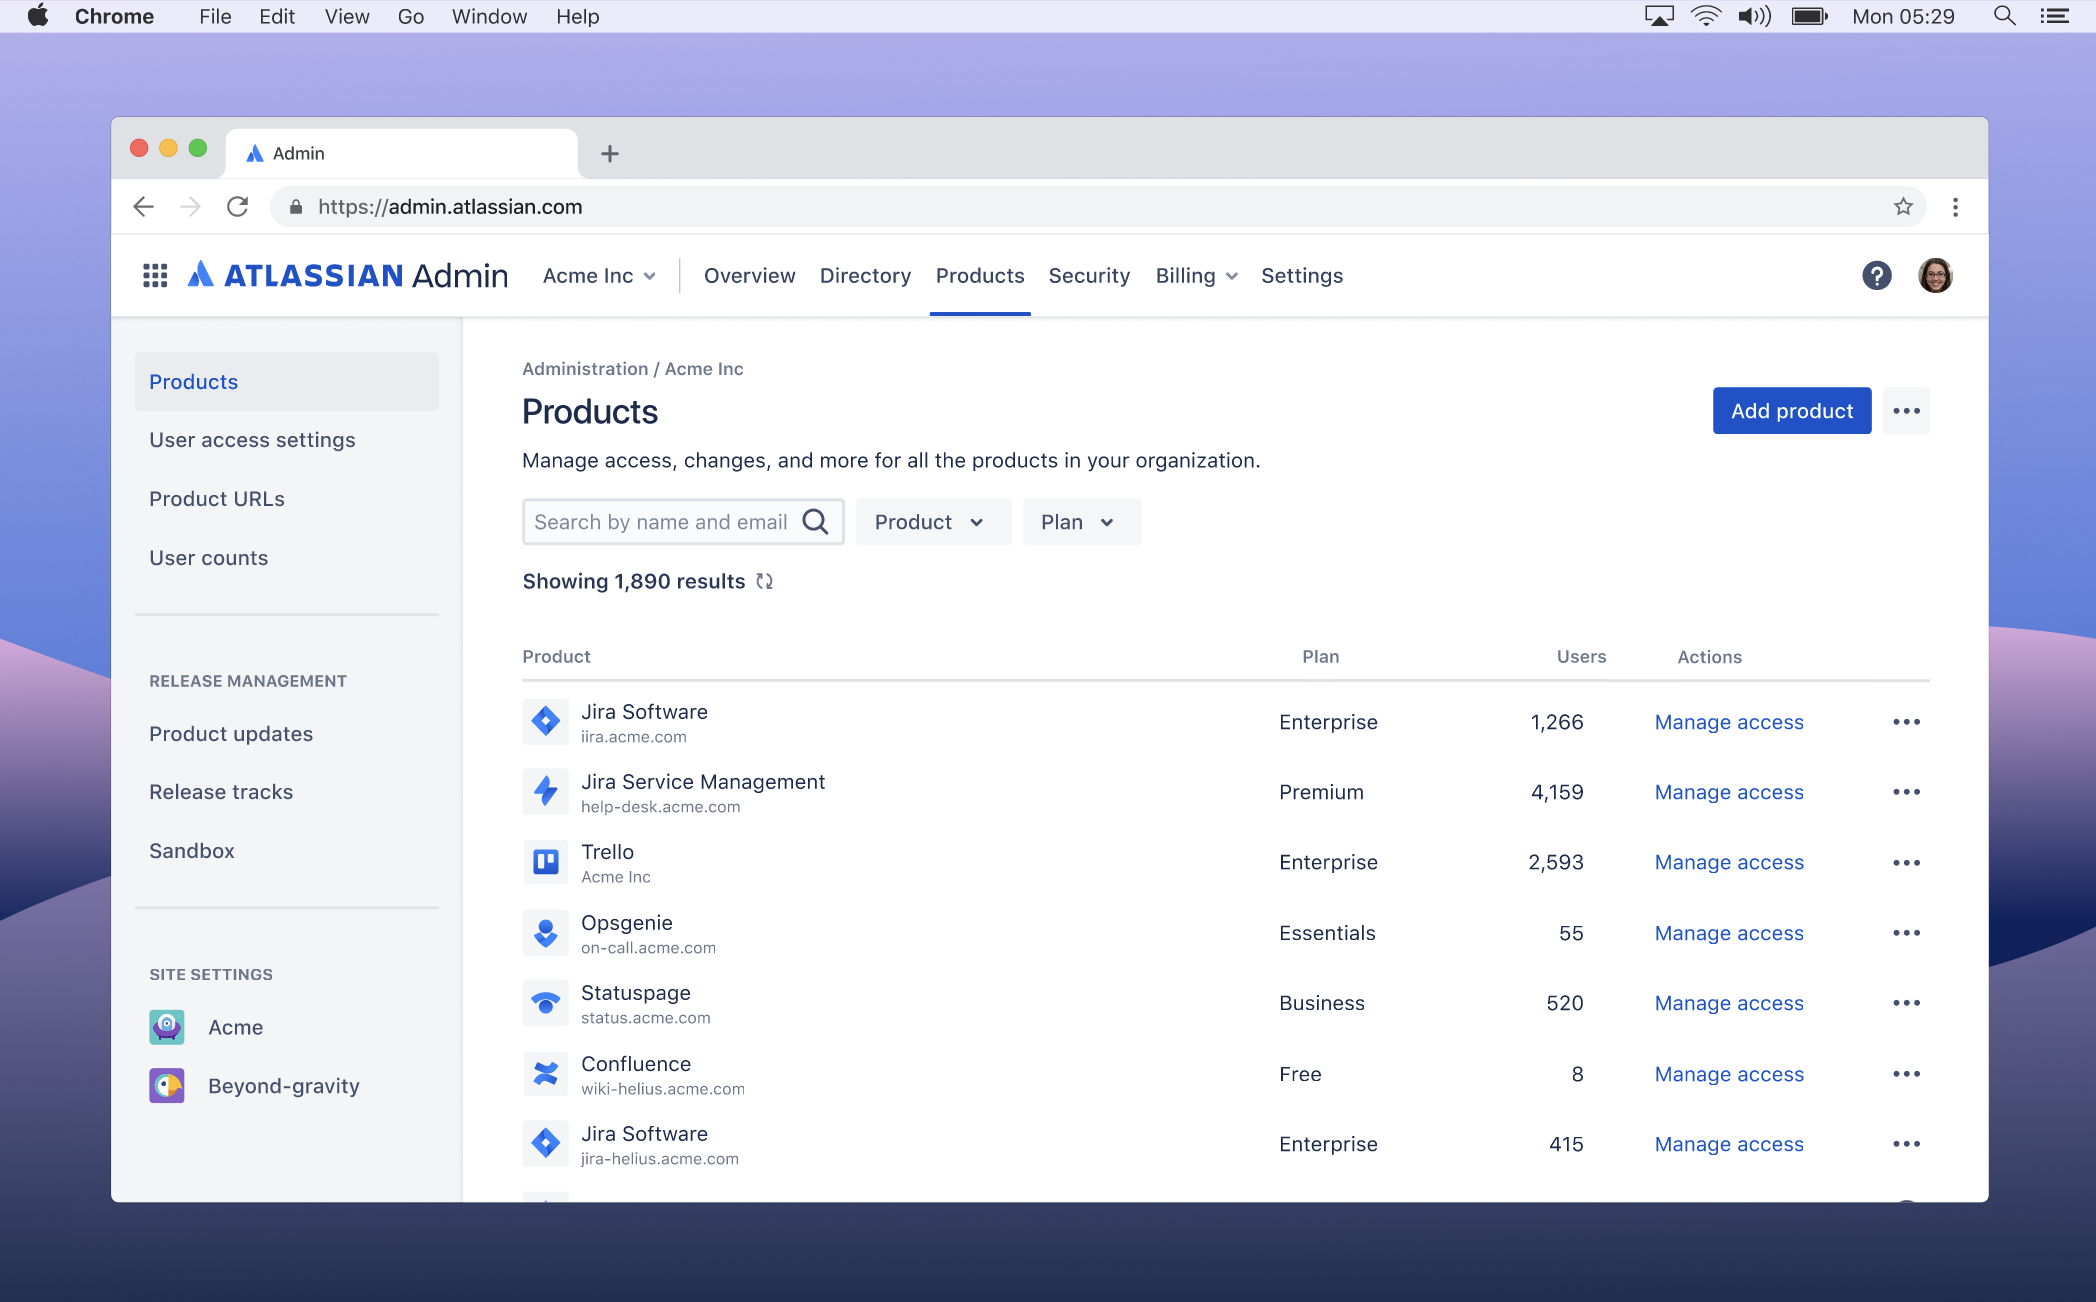 Admins can now select Trello amongst the list of other Atlassian products to manage user access at their company within the Atlassian Administration hub.